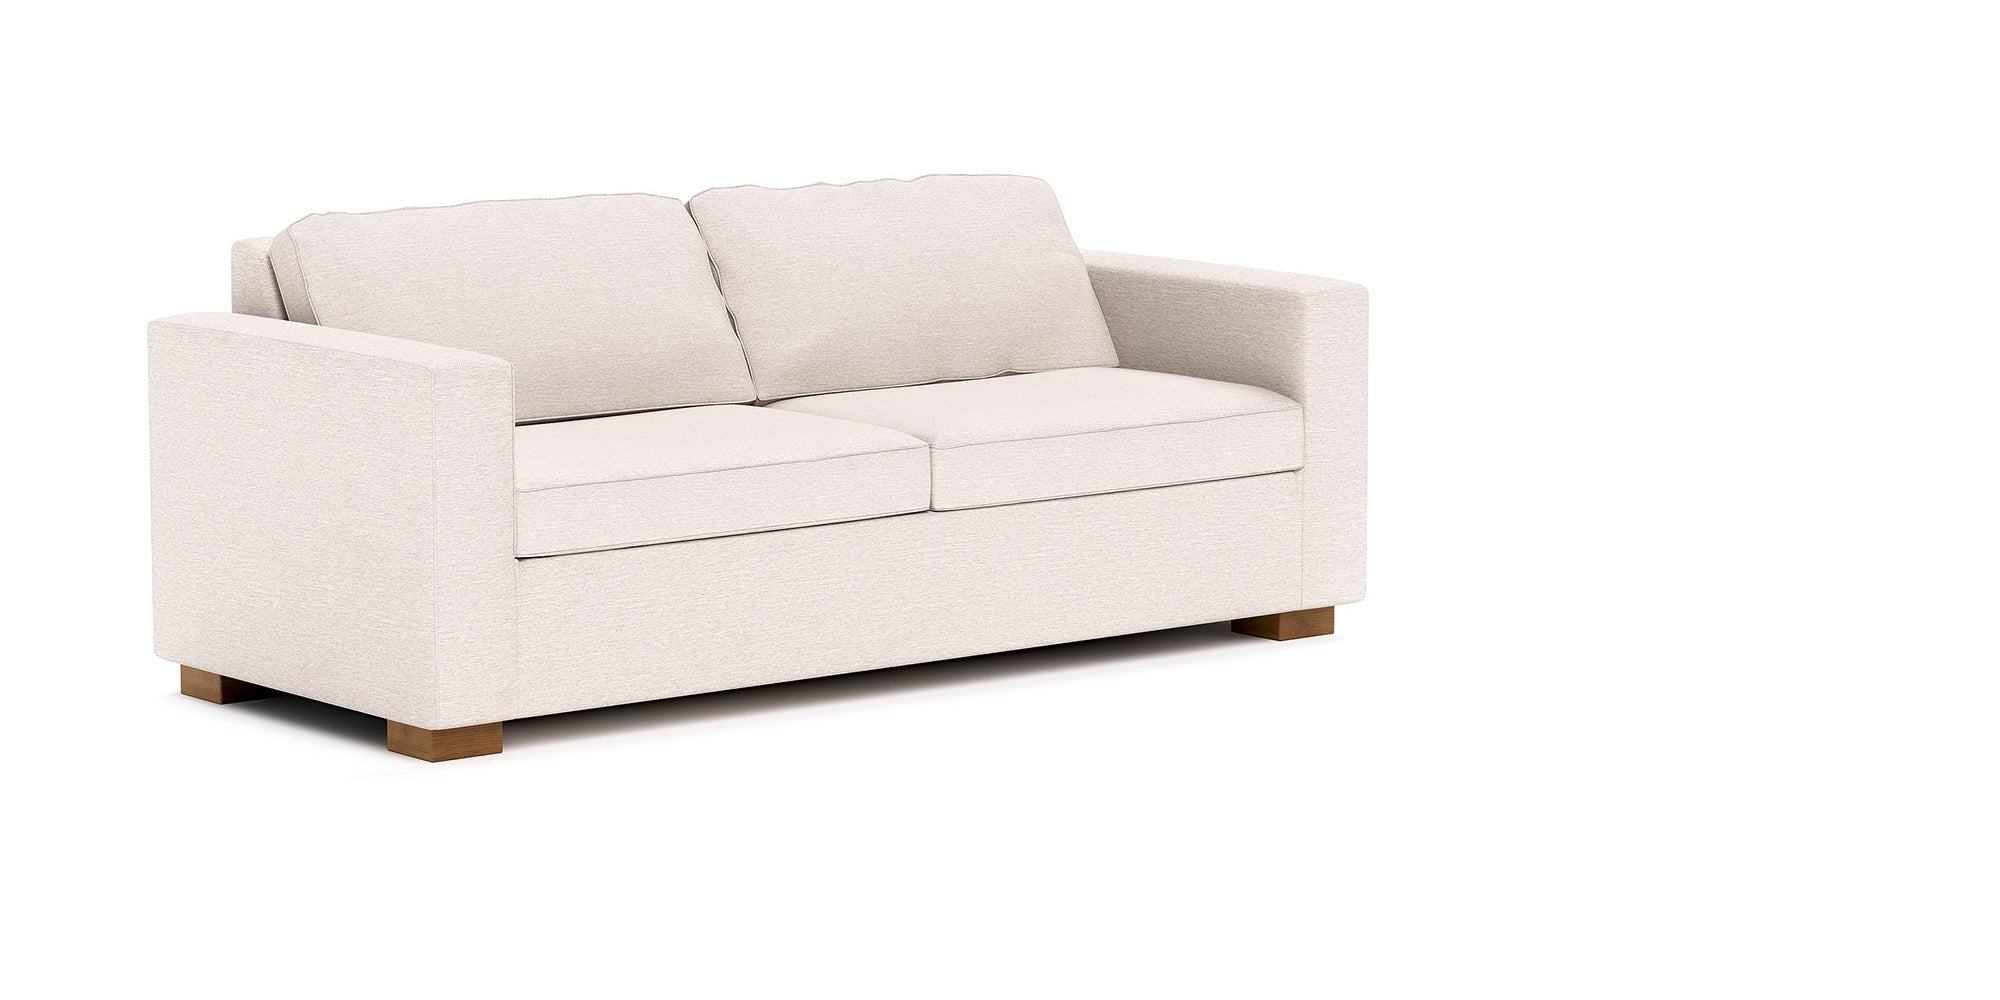 G: Rio Sofa Bed in Queen, shown here in Texture Oyster fabric and Dave Cafe legs.